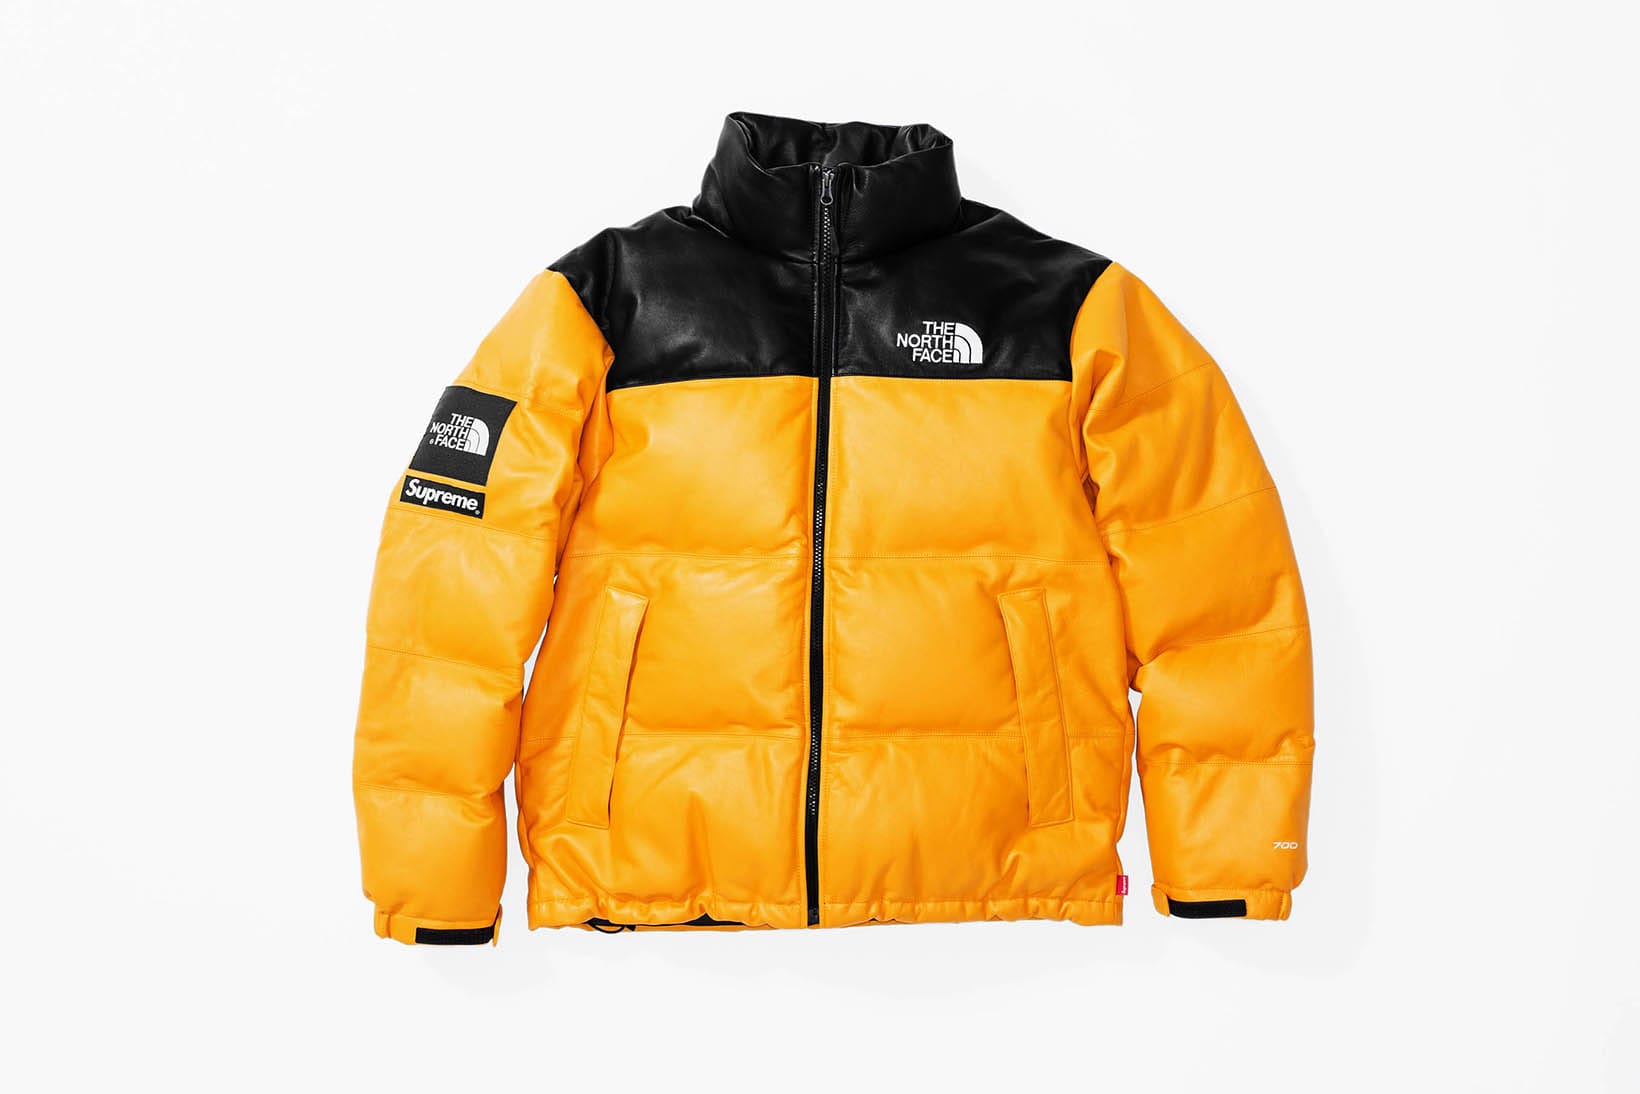 Supreme North Face Jacket Price Clearance Sale, UP TO 66% OFF 